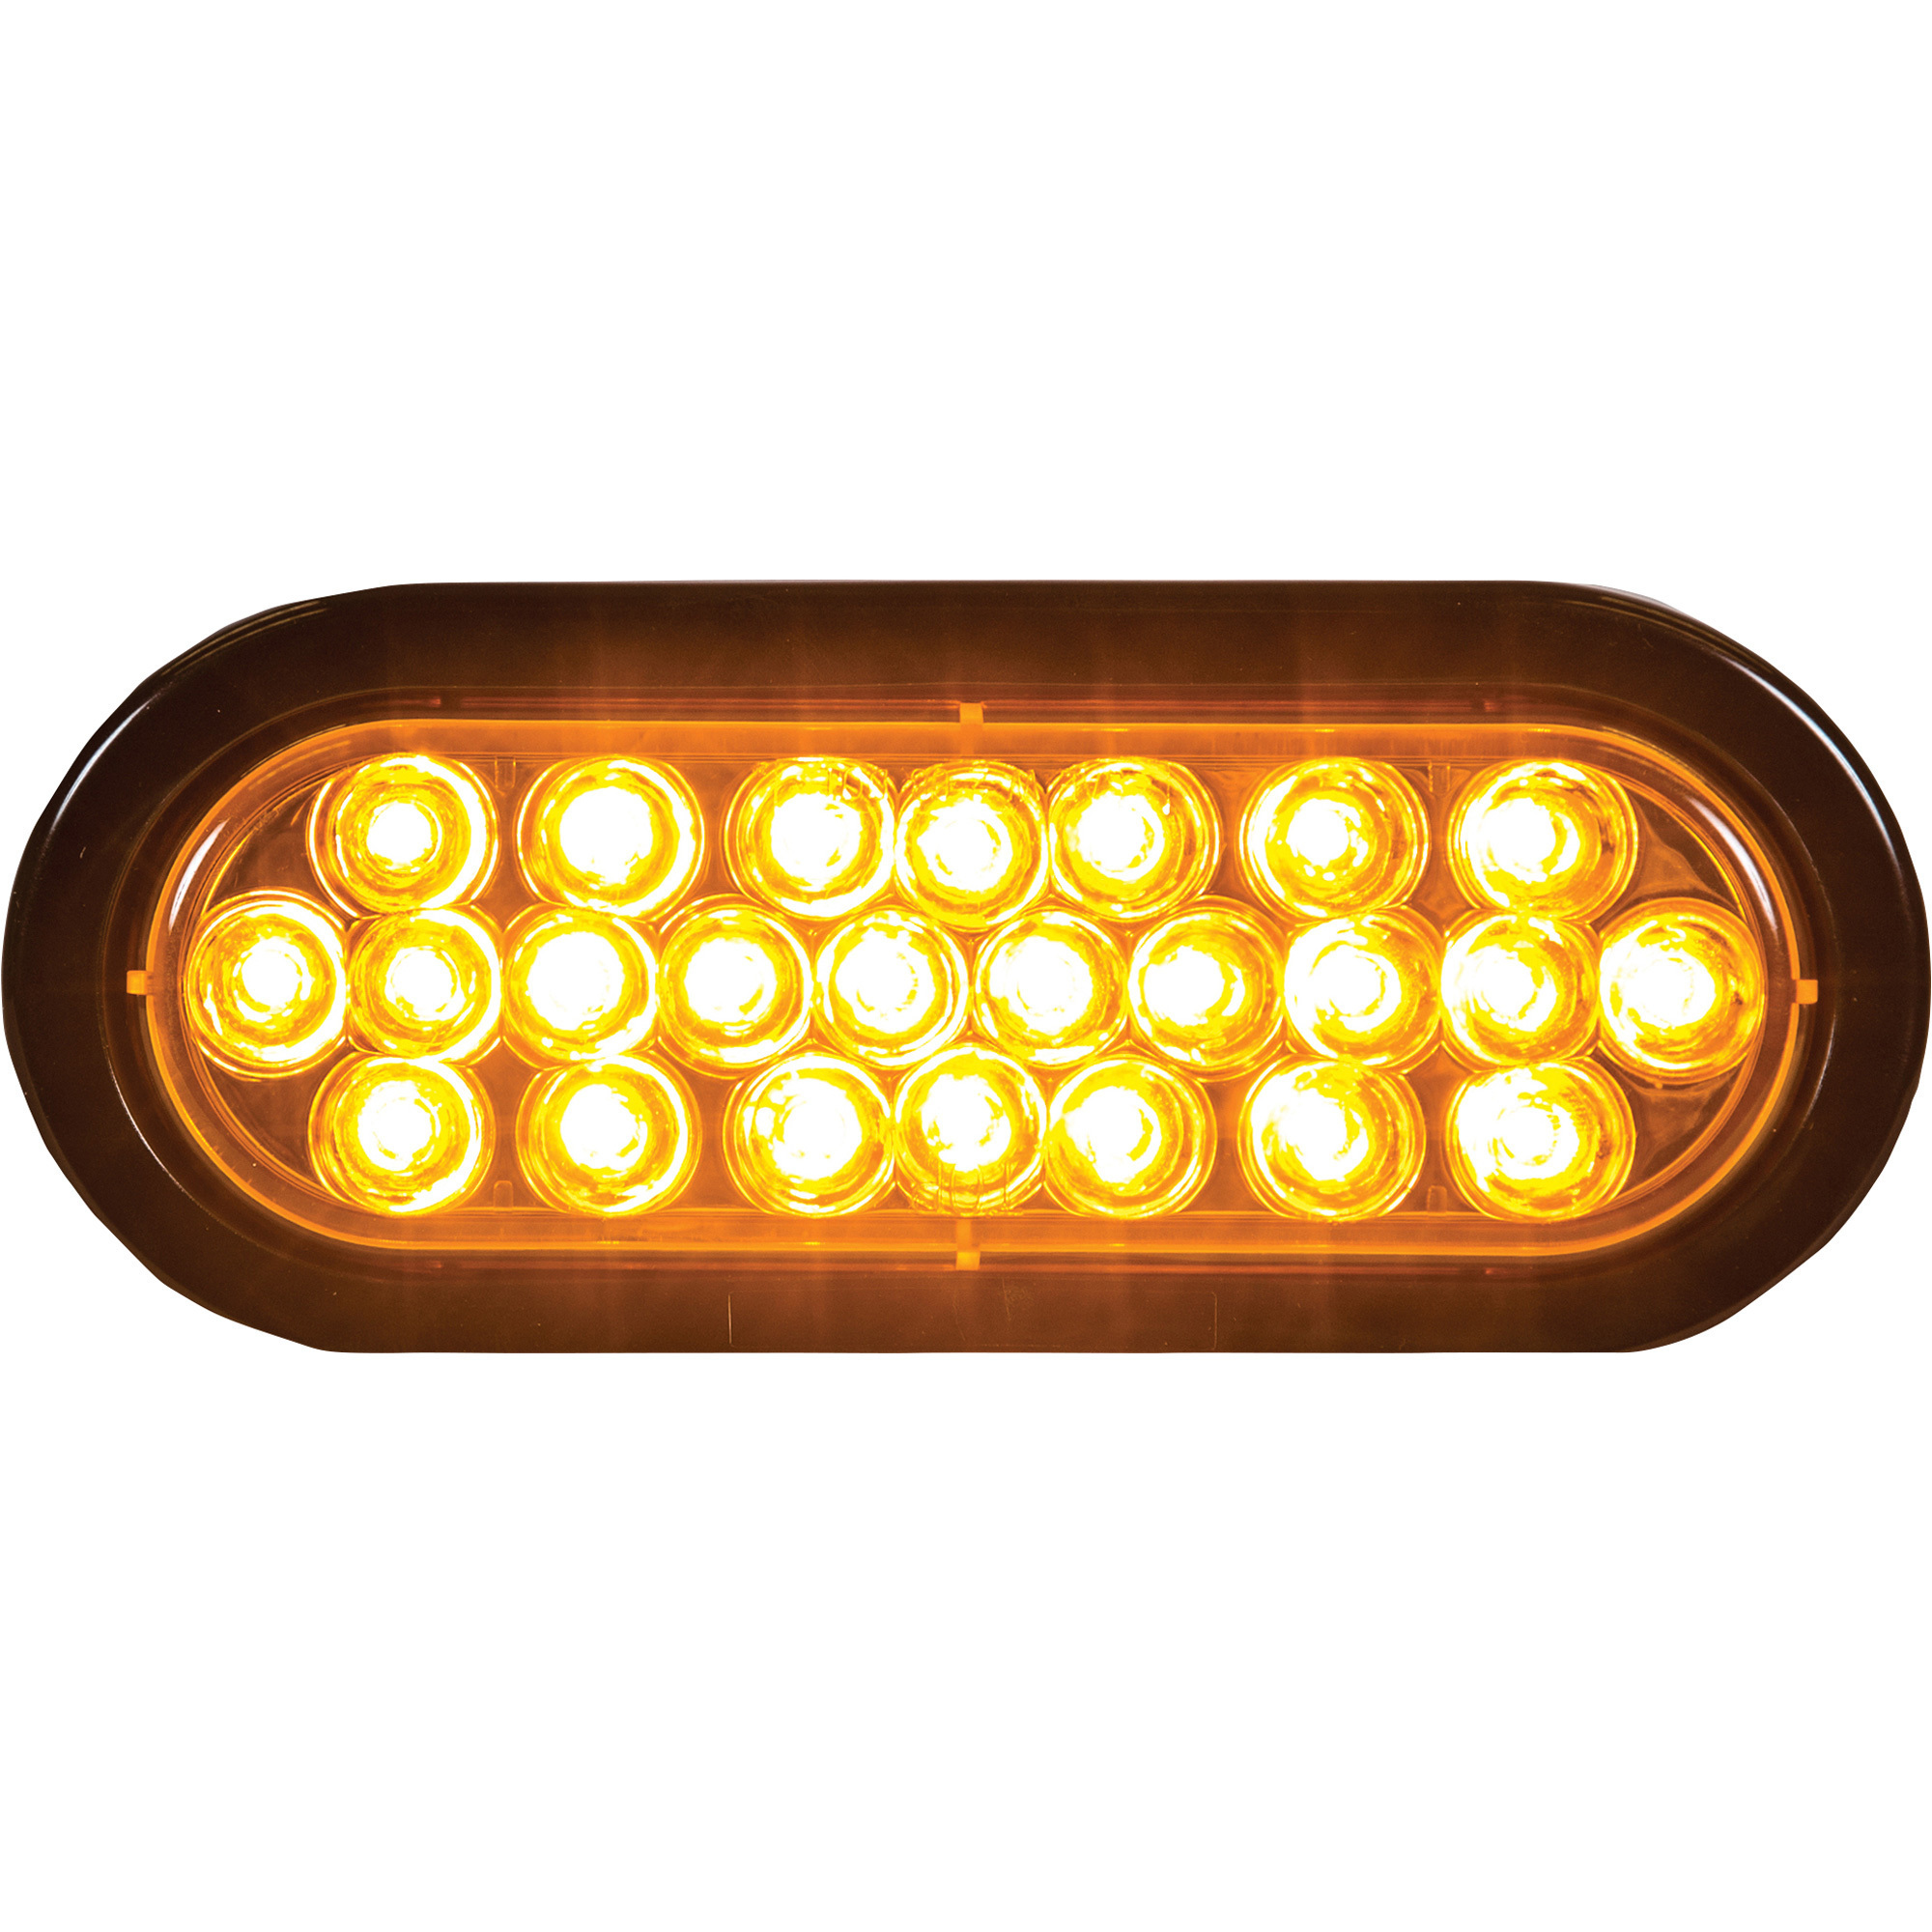 Buyers Products 24-LED Oval Recessed Strobe Light, Amber, 6.5Inch L x 1.75Inch W x 2.25Inch H, Model SL65AO